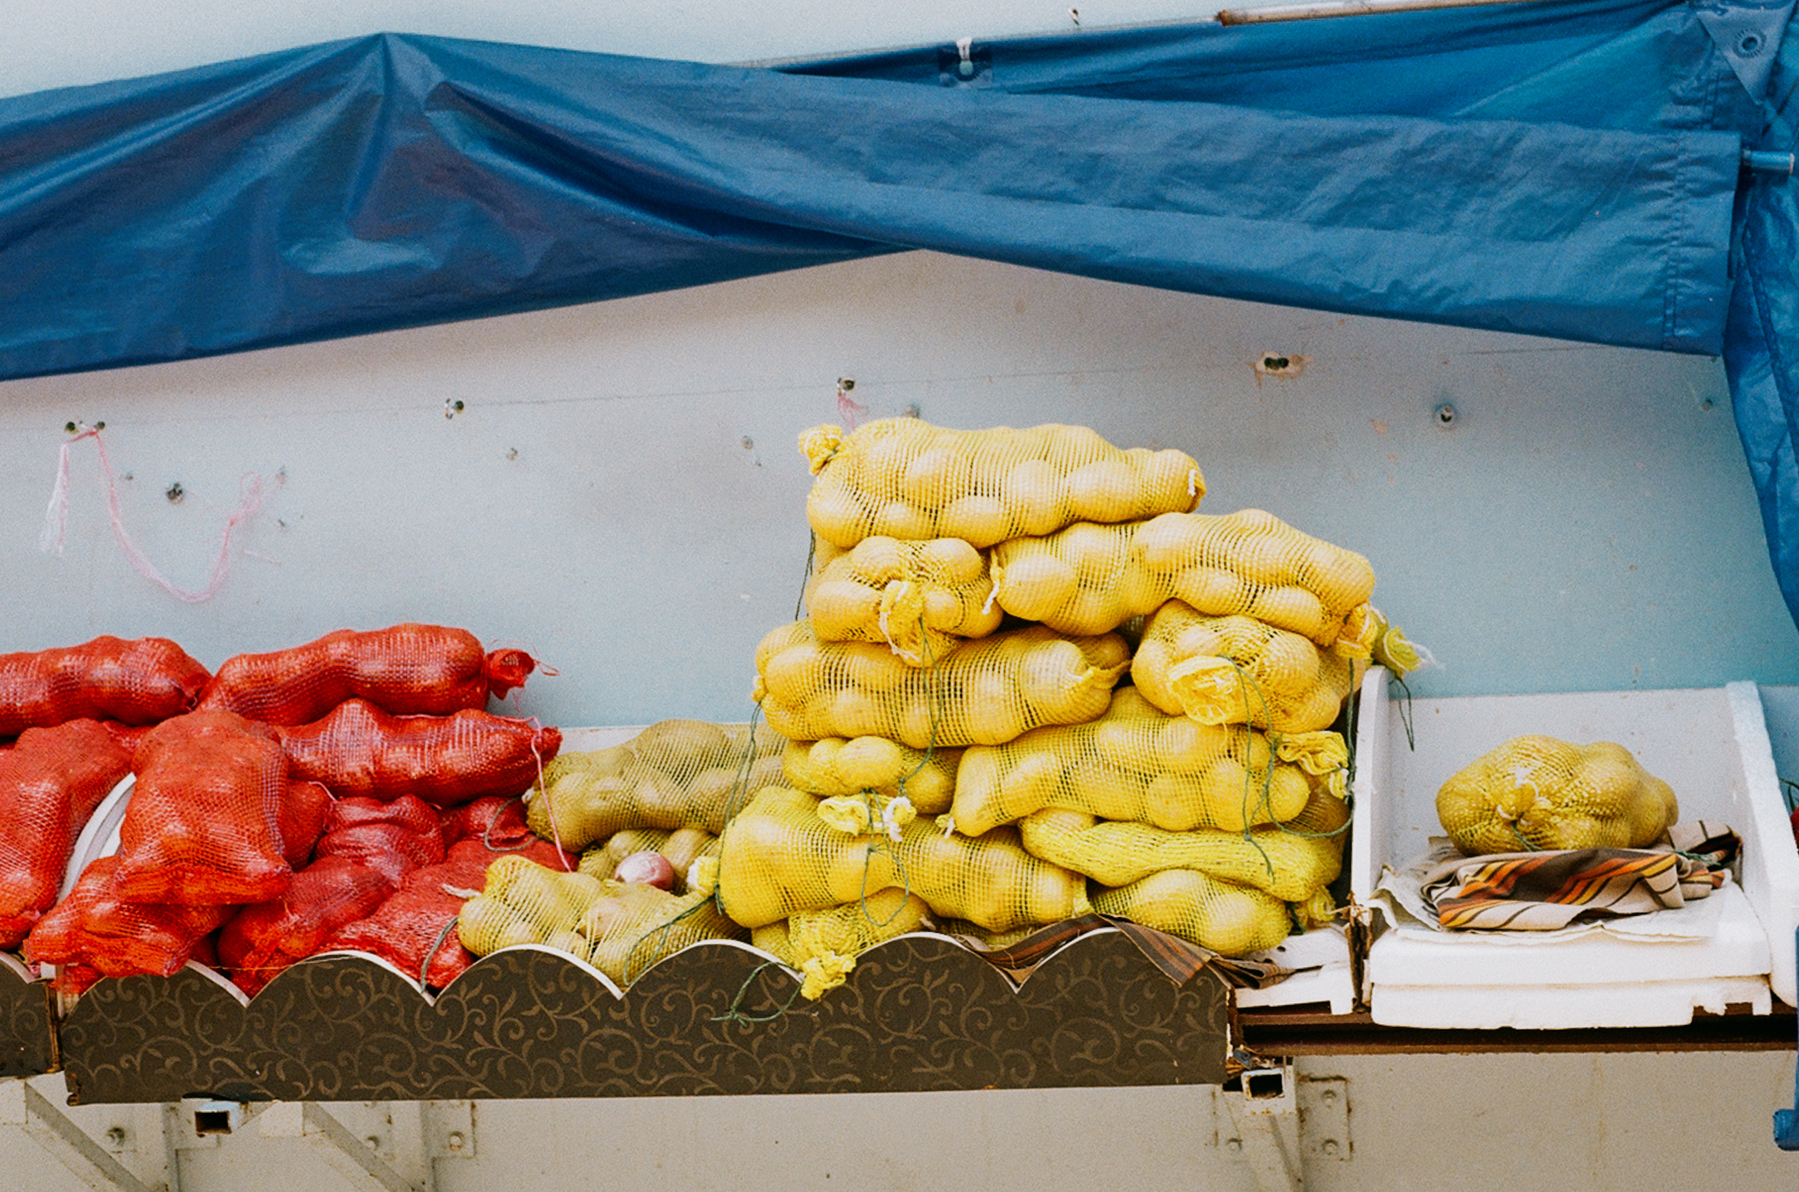 3. A scan of onions and potatoes being displayed at a little India grocer with a blue tarp over it